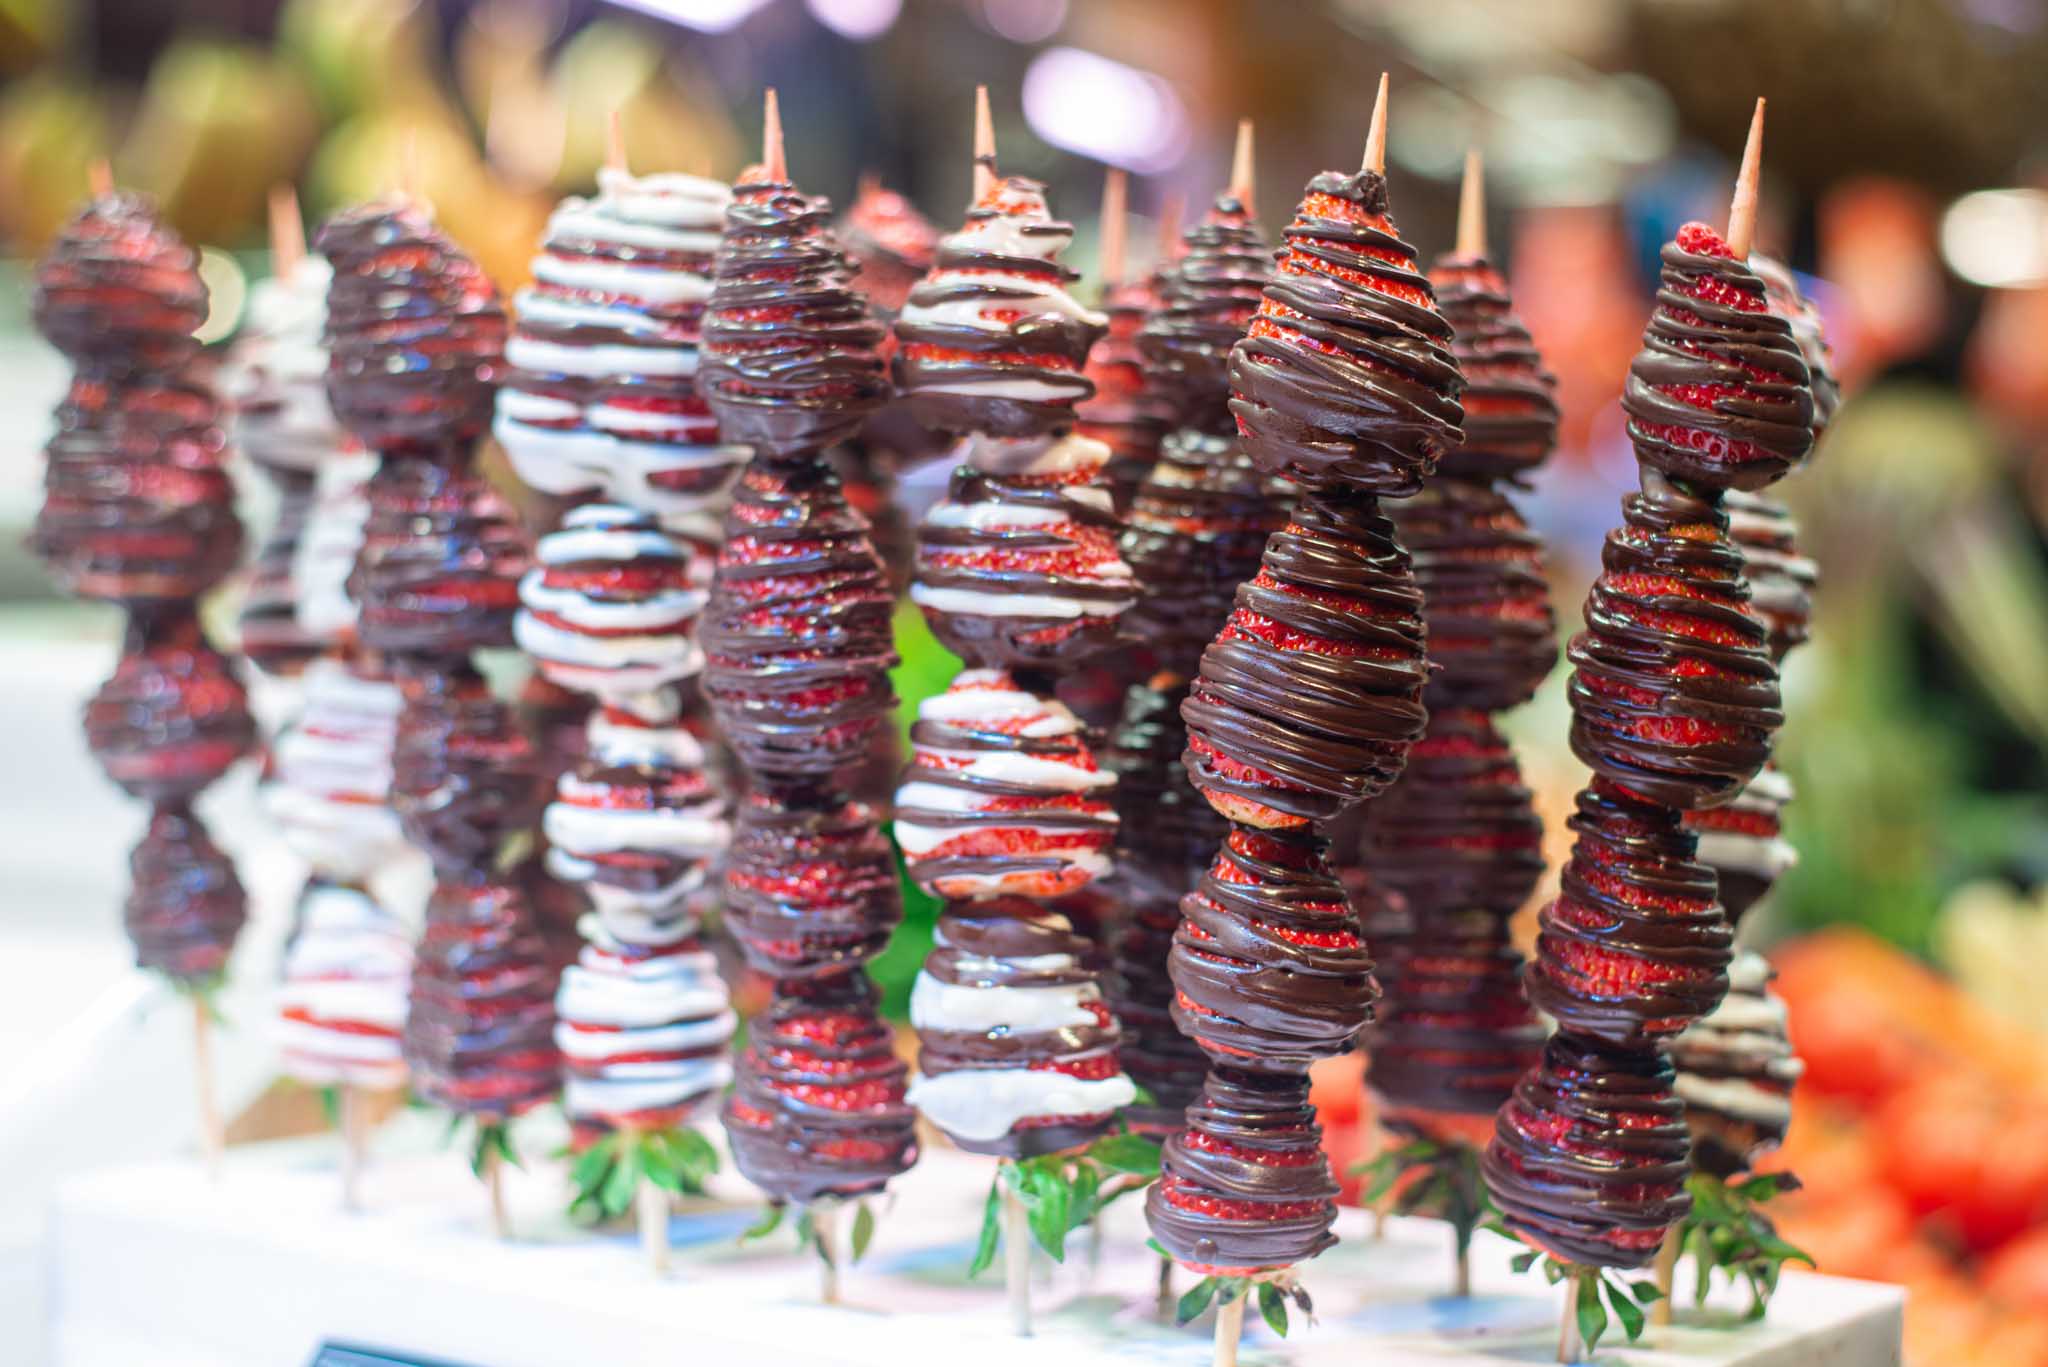 The Real Food Academy chocolate covered fruit skewers.